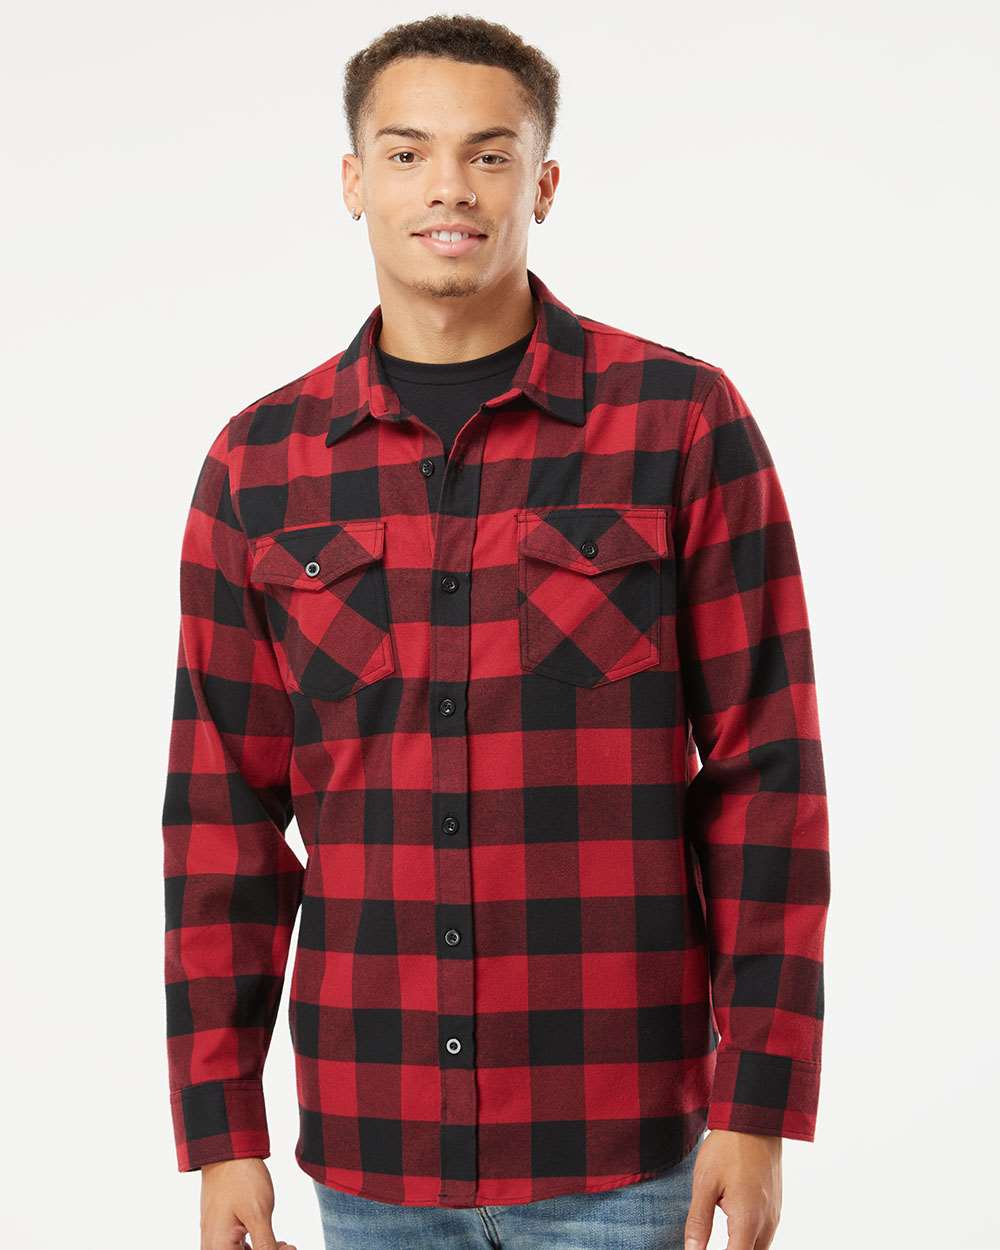 male model in independent trading co flannel shirt red black